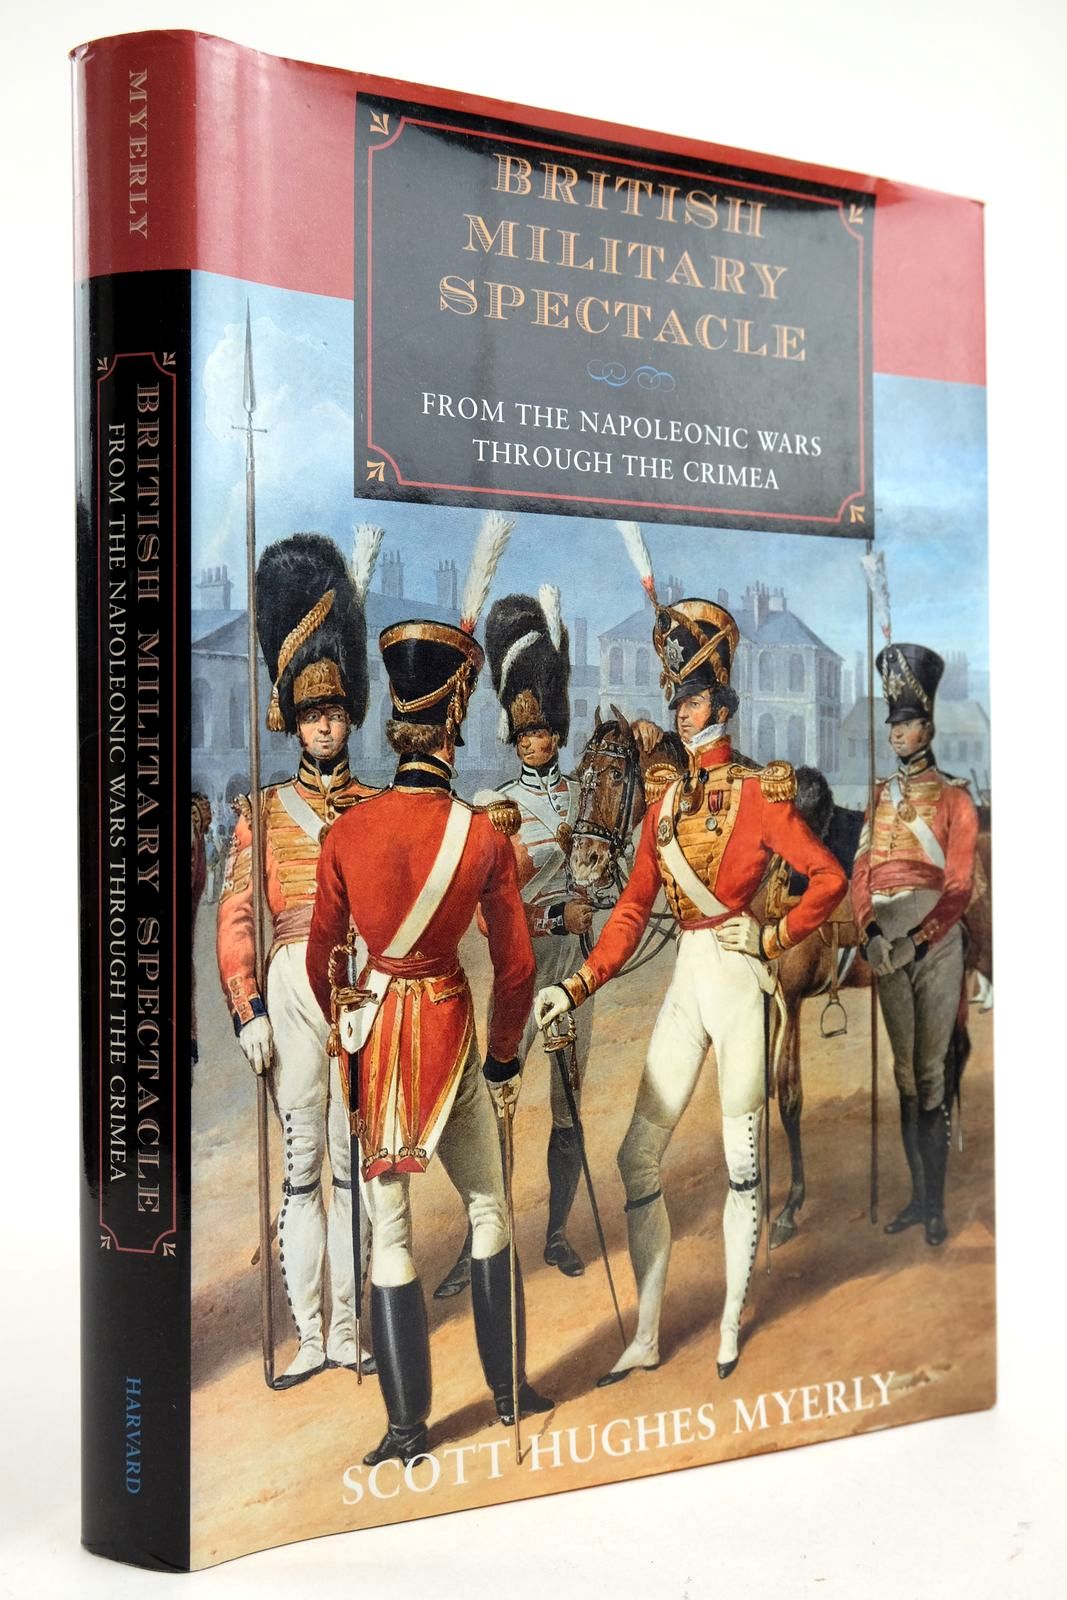 Photo of BRITISH MILITARY SPECTACLE FROM THE NAPOLEONIC WARS THROUGH THE CRIMEA written by Myerly, Scott Hughes published by Harvard University Press (STOCK CODE: 2132896)  for sale by Stella & Rose's Books